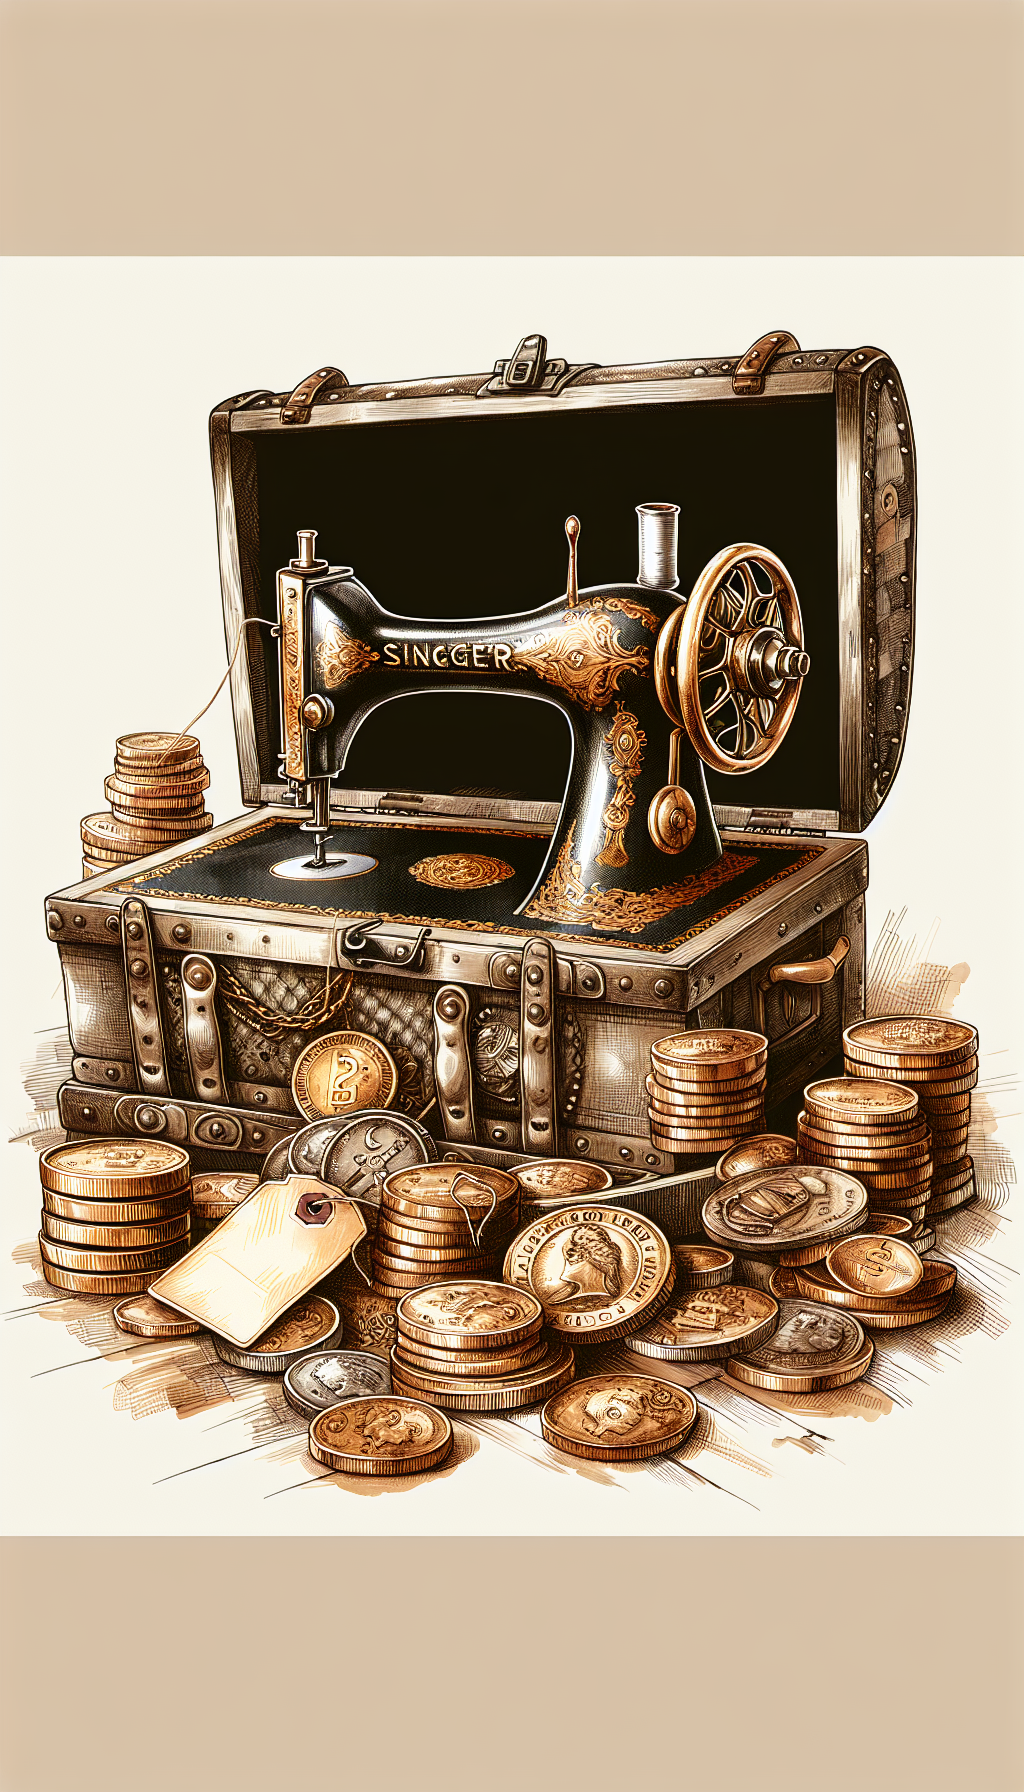 An aged, ornate Singer sewing machine sits atop an overflowing treasure chest, with gold coins, price tags, and antique appraisal tools scattered around. Various styles, like sepia-tone sketches juxtaposed with vibrant watercolor details, signify the transition from vintage to valuable, highlighting factors like rarity and condition that affect its worth.